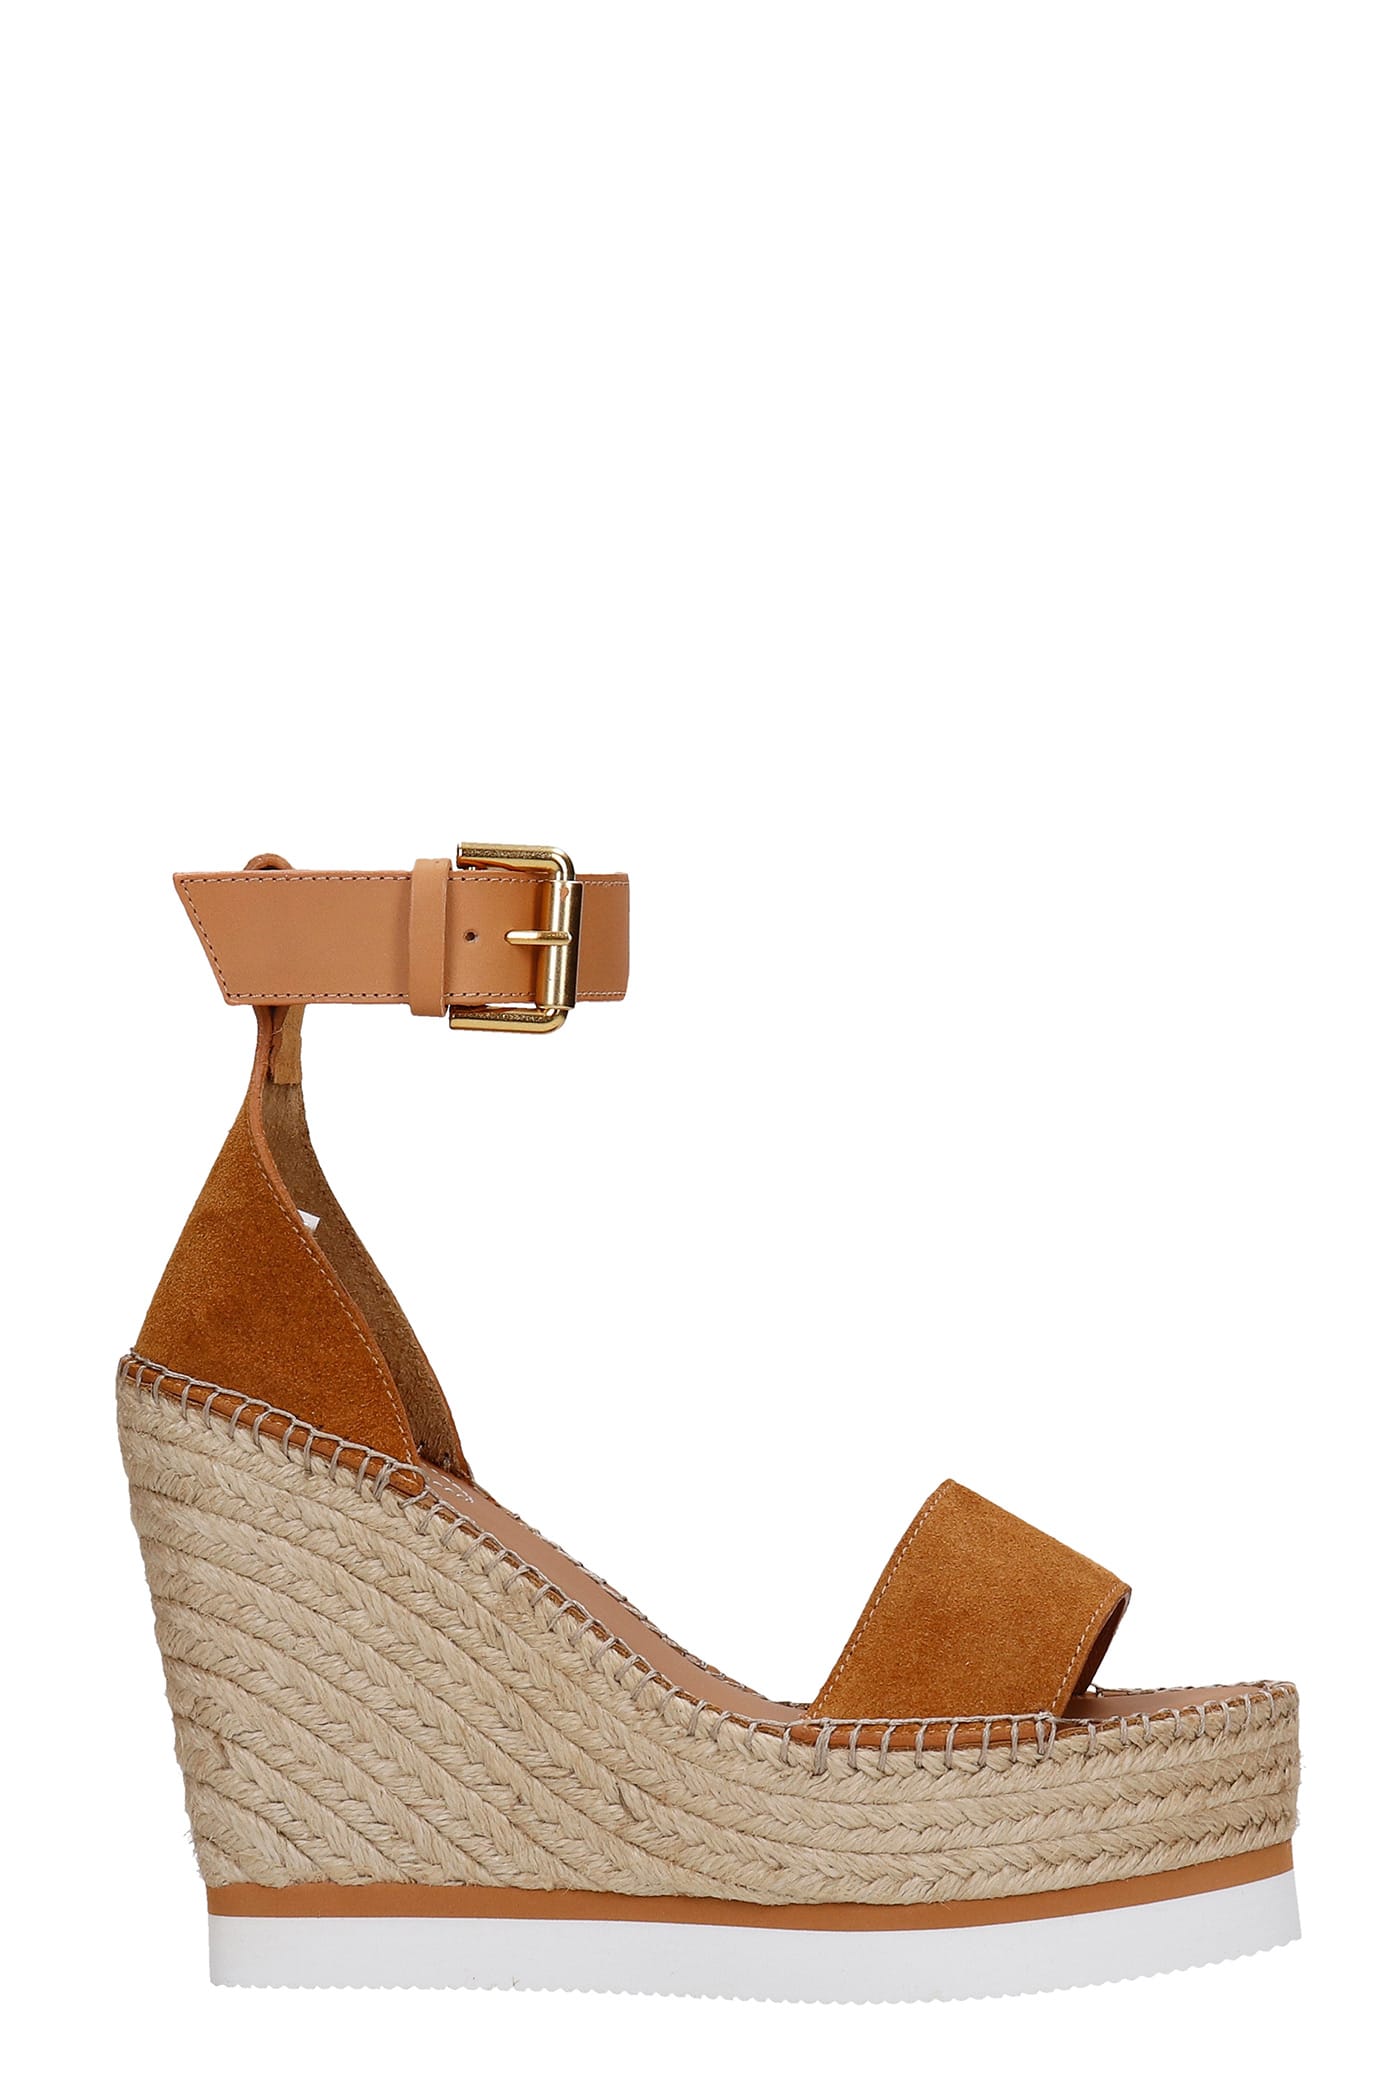 See by Chloé Wedges In Leather Color Suede